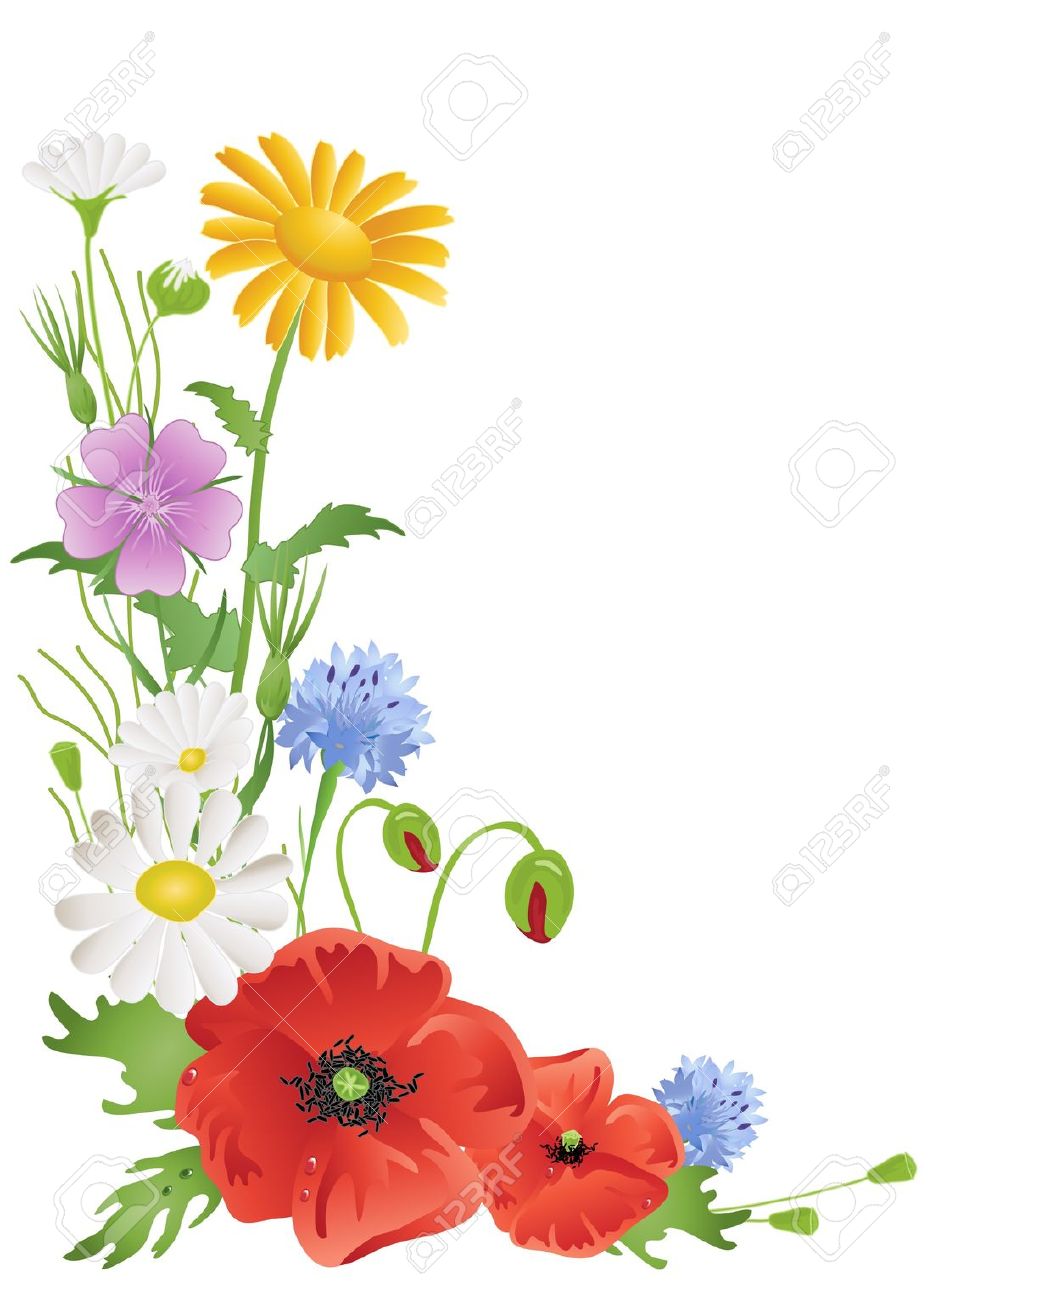 An Illustration Of An Arrangement Of Annual Wildflowers With.